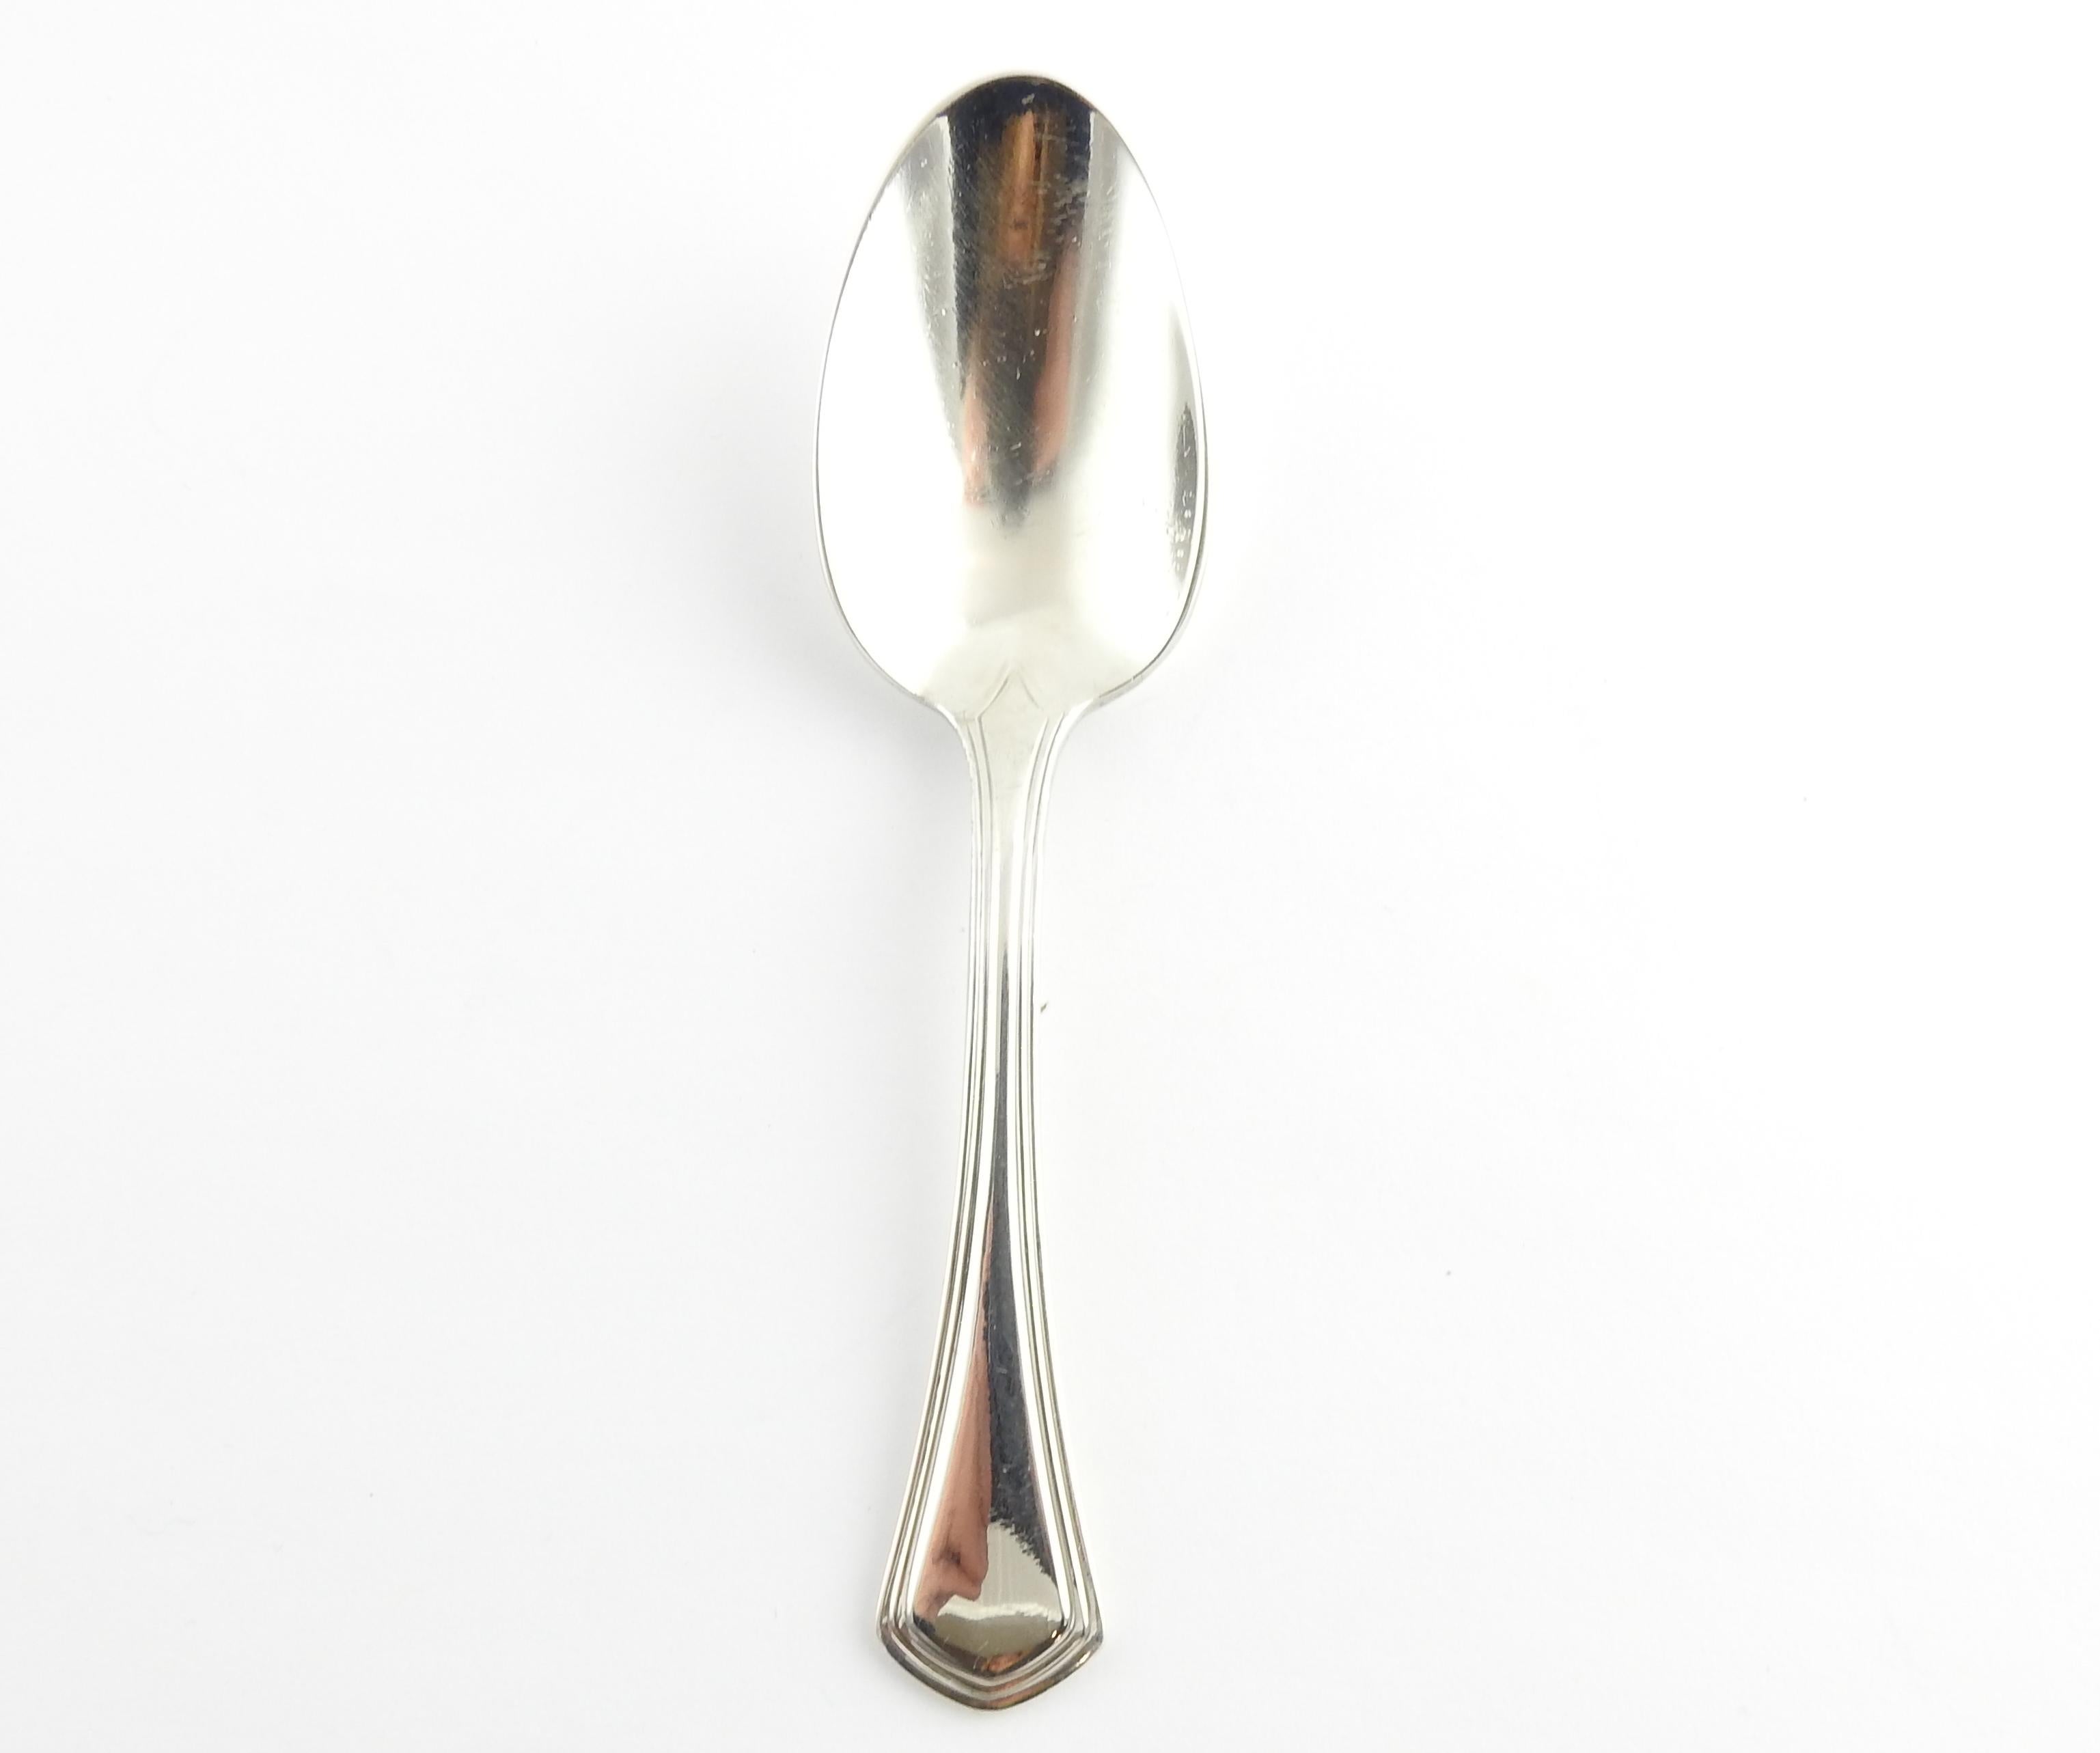 Vintage Tiffany & Co. sterling silver baby feeding spoon

This authentic Tiffany & Co. sterling spoon is approx. 4.25